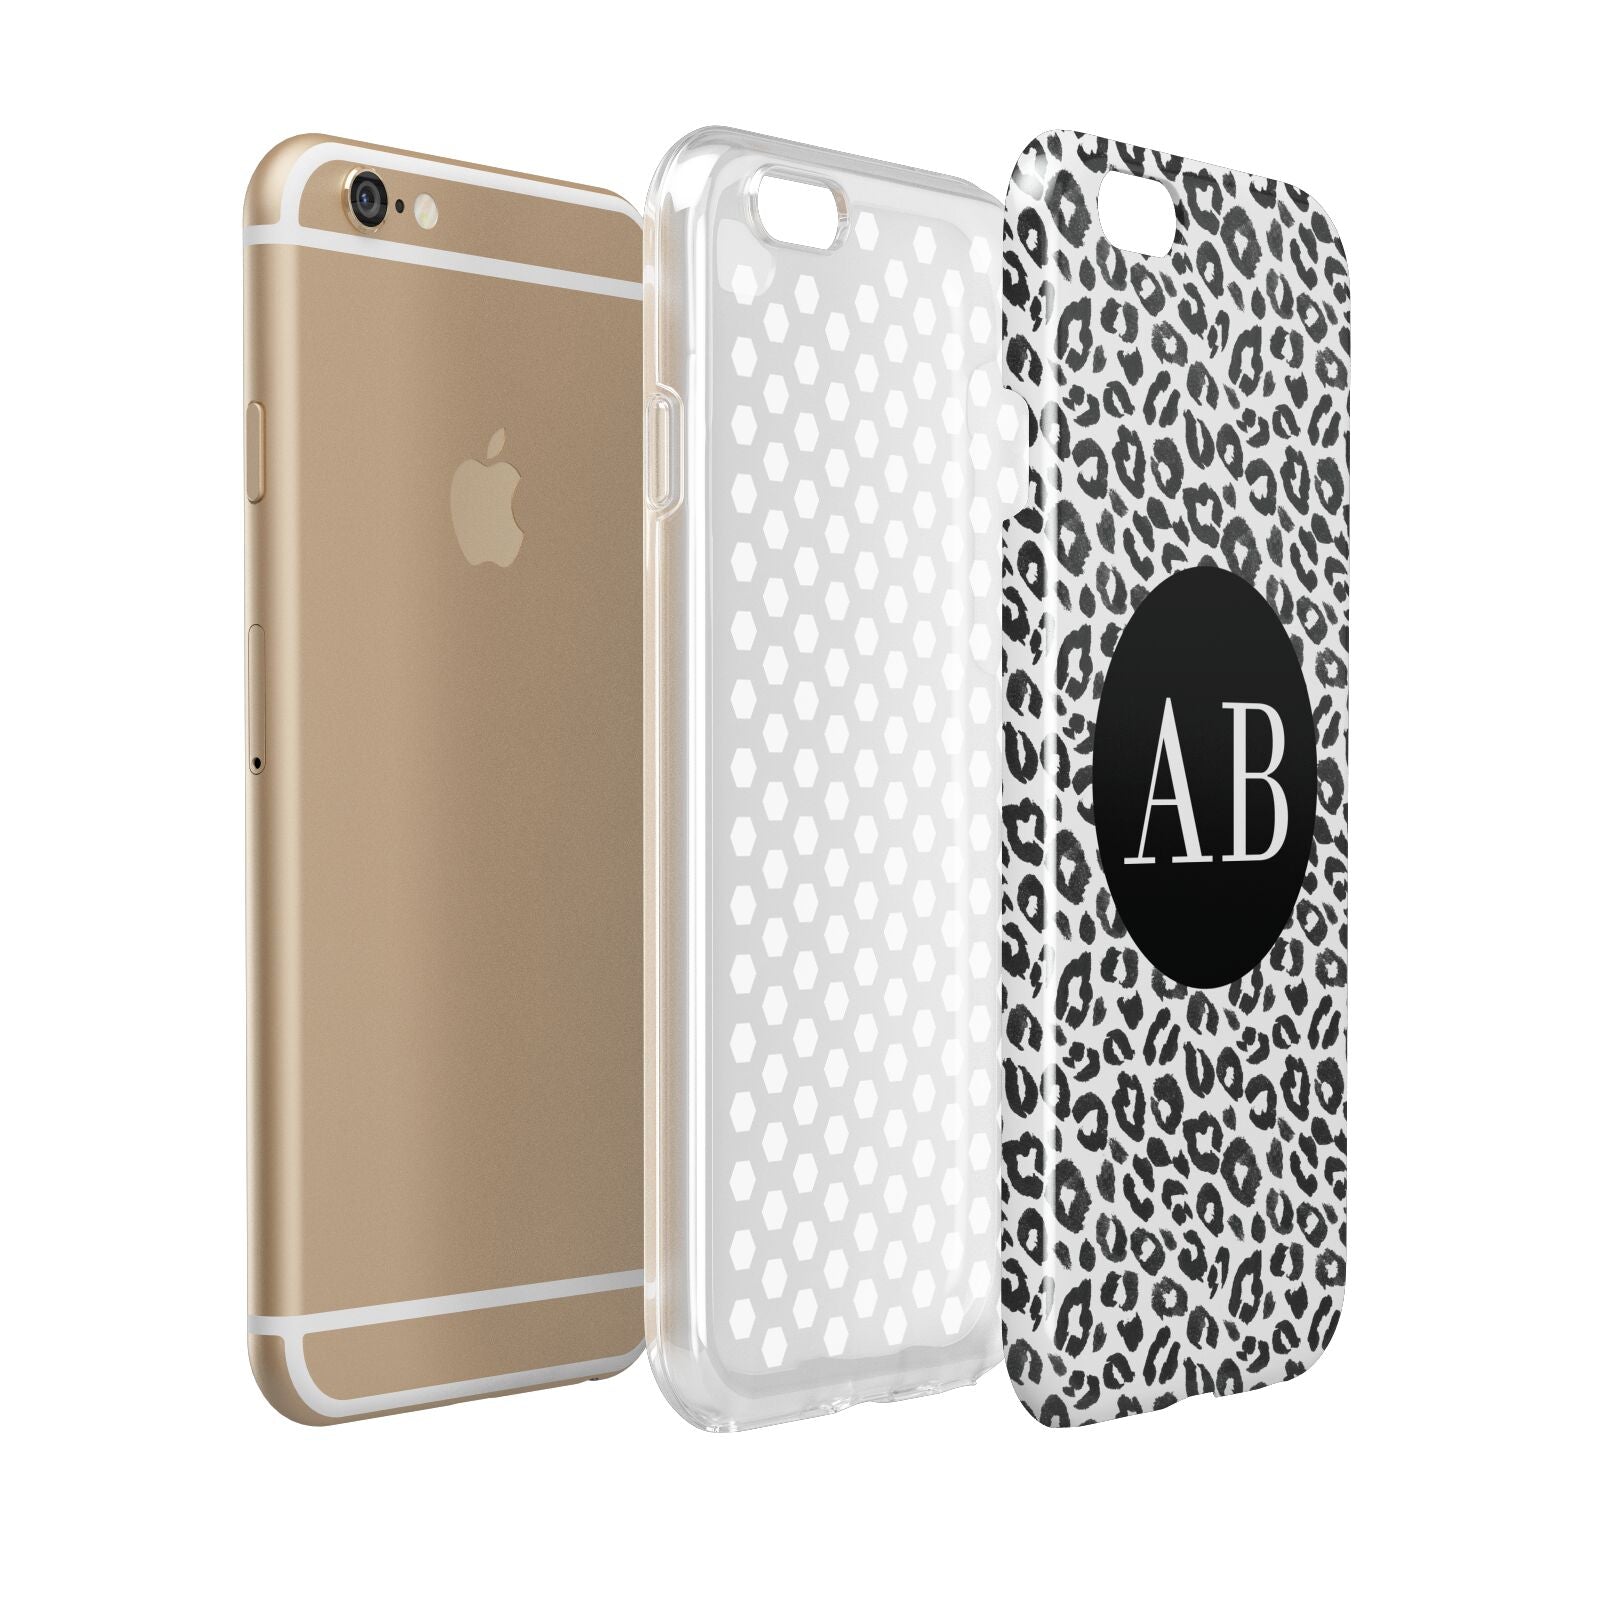 Leopard Print Black and White Apple iPhone 6 3D Tough Case Expanded view